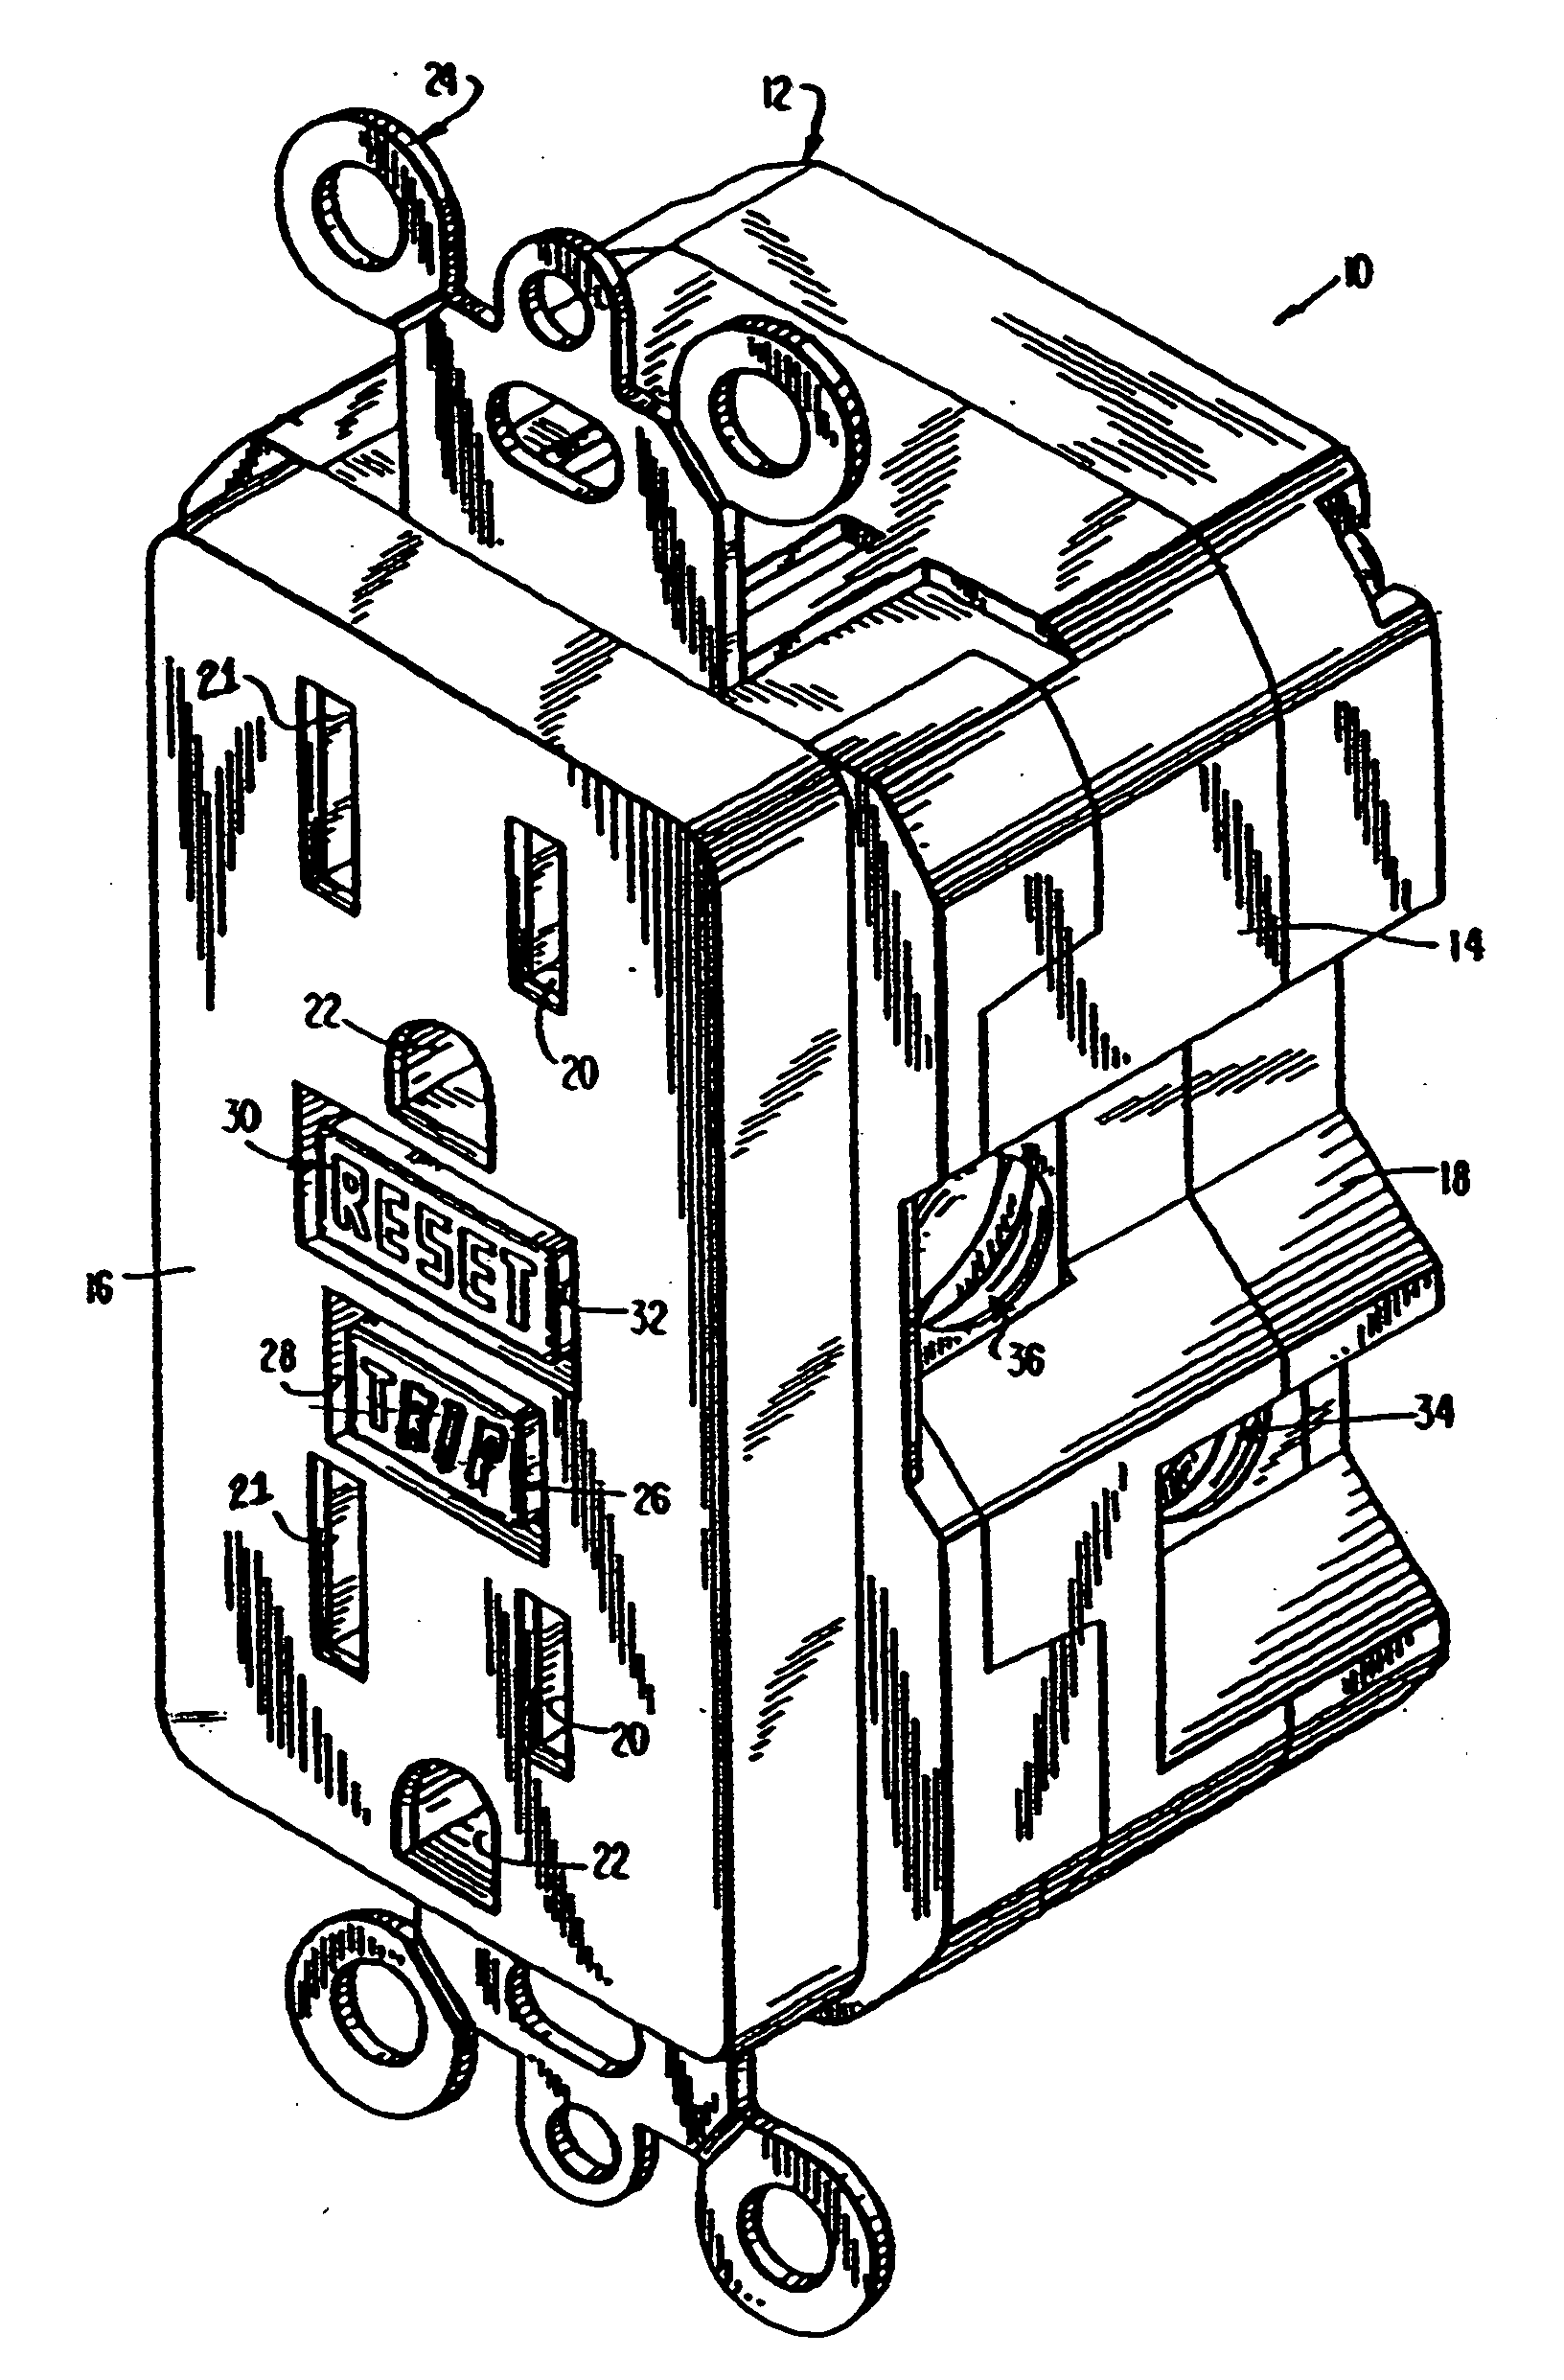 Circuit interrupting device with single throw, double mode button for test-reset function